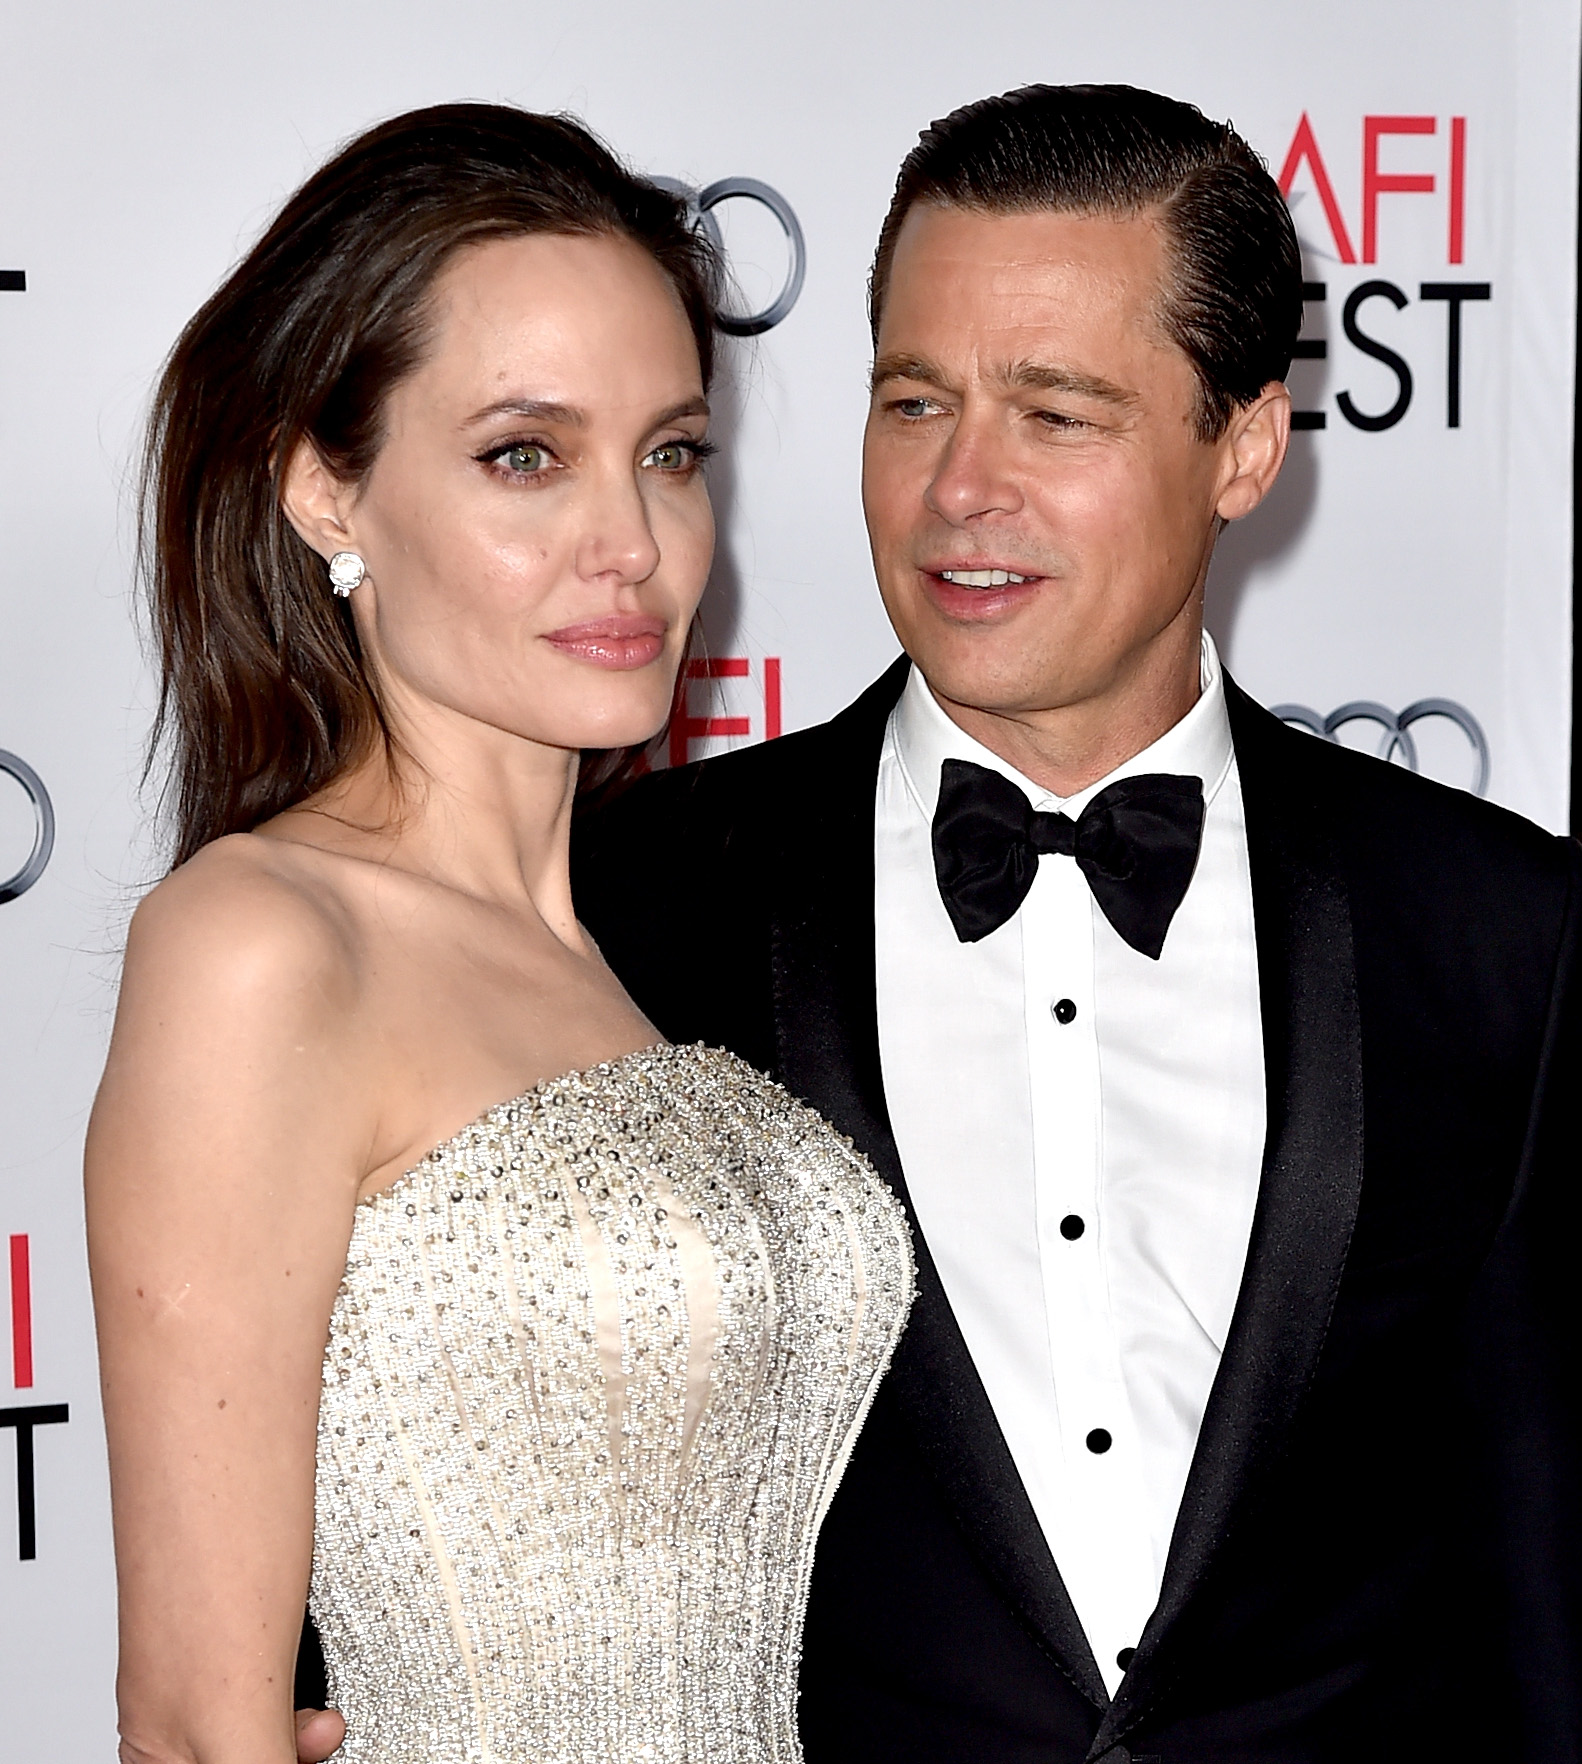 (FILES) This file photo taken on November 04, 2015 shows actress Angelina Jolie Pitt and husband actor Brad Pitt at the AFI FEST 2015 presented by Audi opening night gala premiere of Universal Pictures' "By The Sea" at the Chinese Theatre in Los Angeles, California. Brad Pitt has accused Angelina Jolie of compromising their children's privacy and is asking a judge to seal details about the youngsters emerging from the couple's divorce, court papers showed Thursday. / AFP PHOTO / KEVIN WINTER